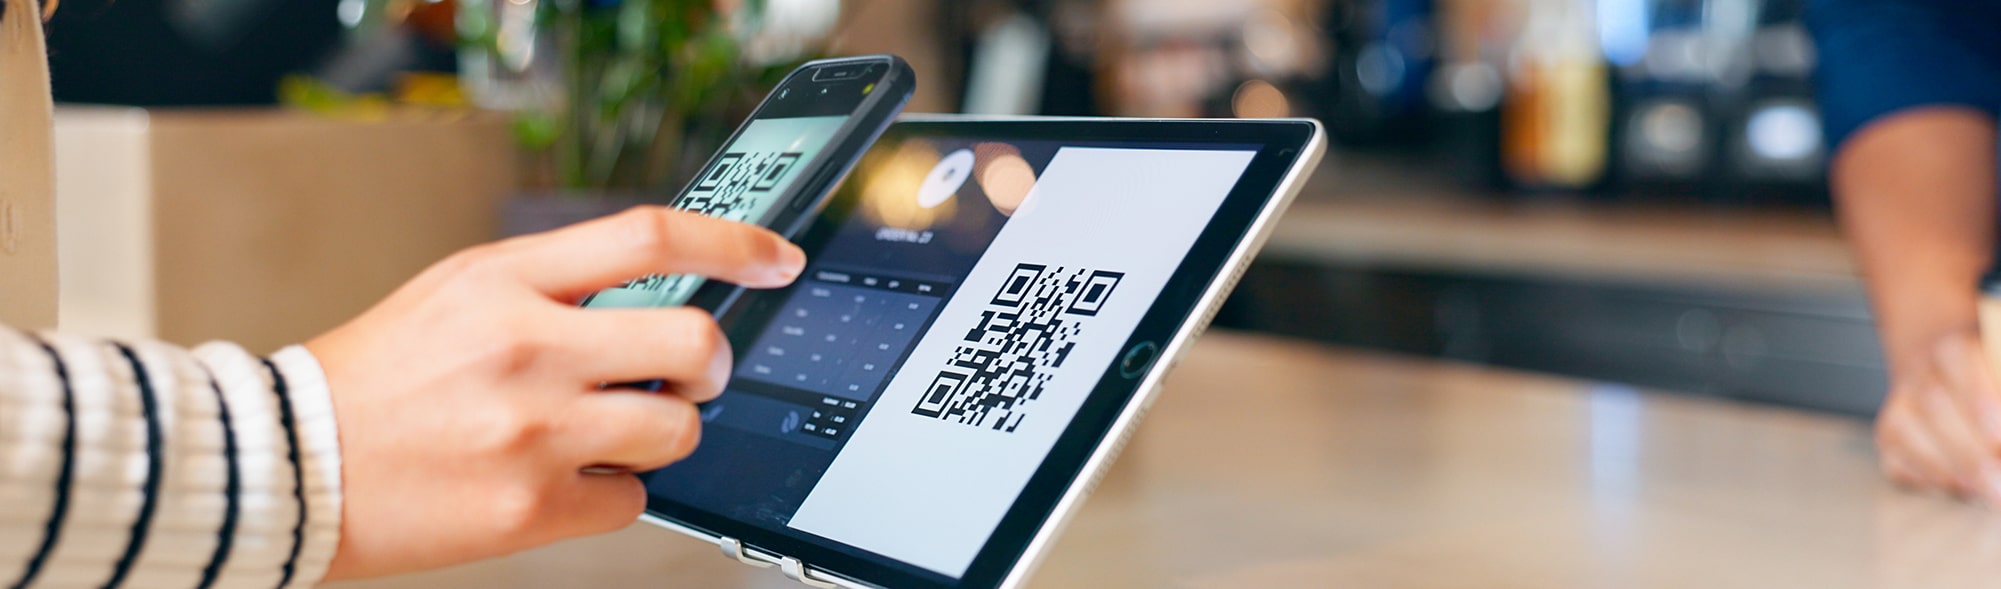 Hands, phone and qr code in coffee shop, payment and fintech app with pos, deal and services with scanning in store. People, smartphone and machine for point of sale, banking and barcode in cafeteria